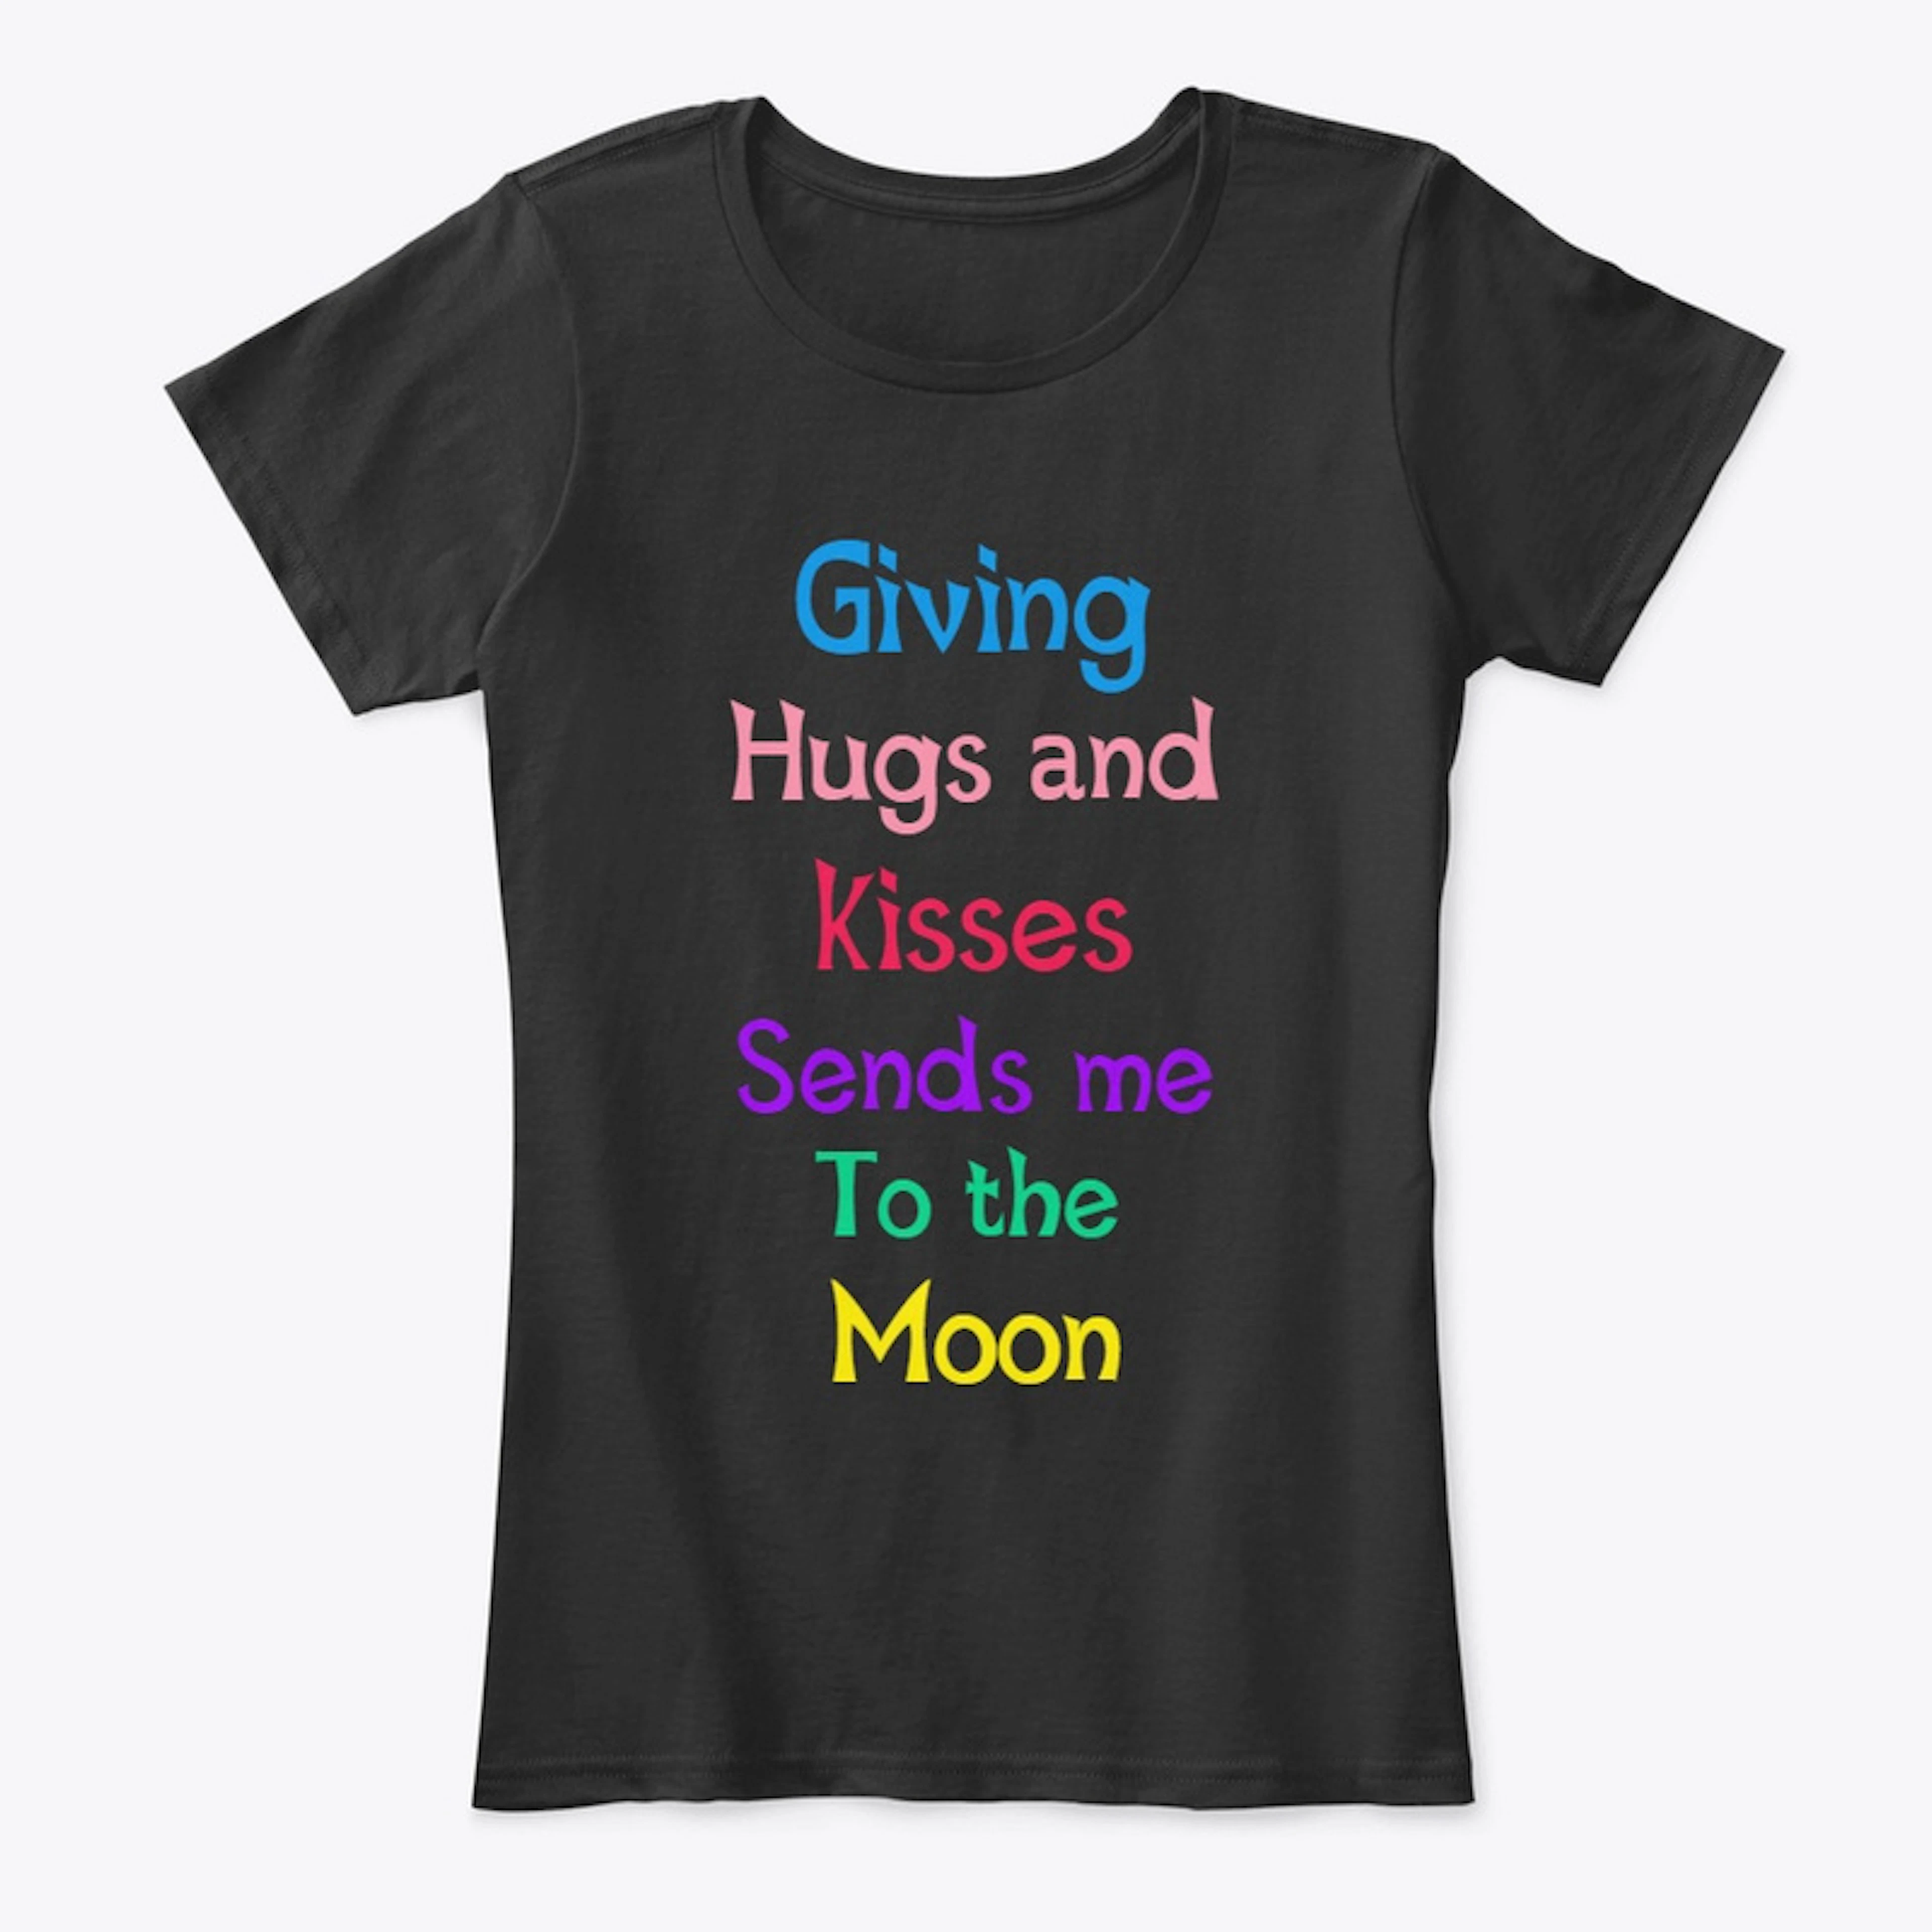 T-shirts with phrases